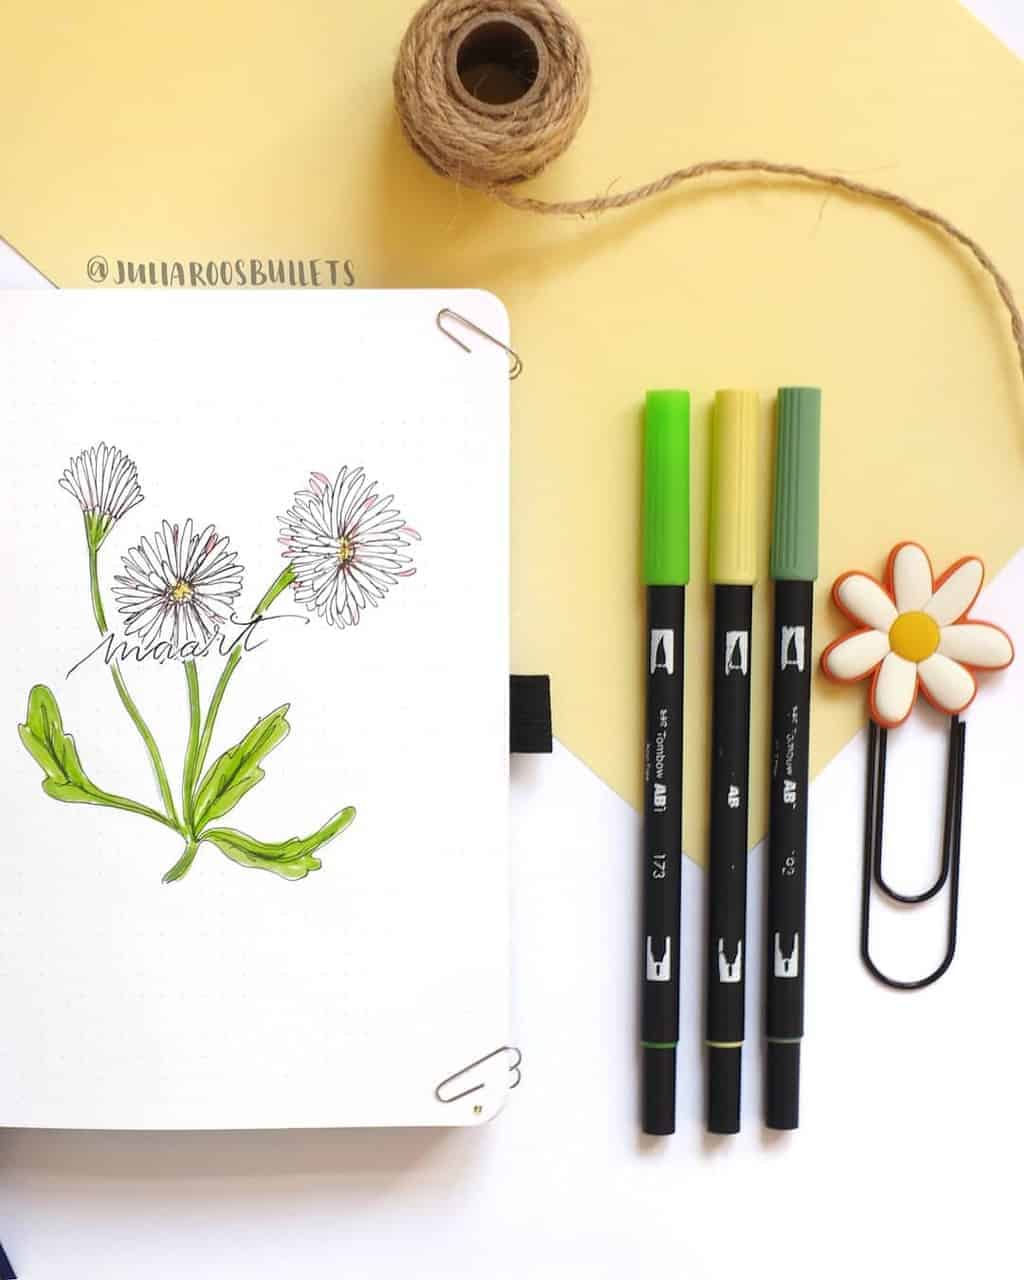 Spring Bullet Journal Theme Ideas - cover page by @juliaroosbullets | Masha Plans